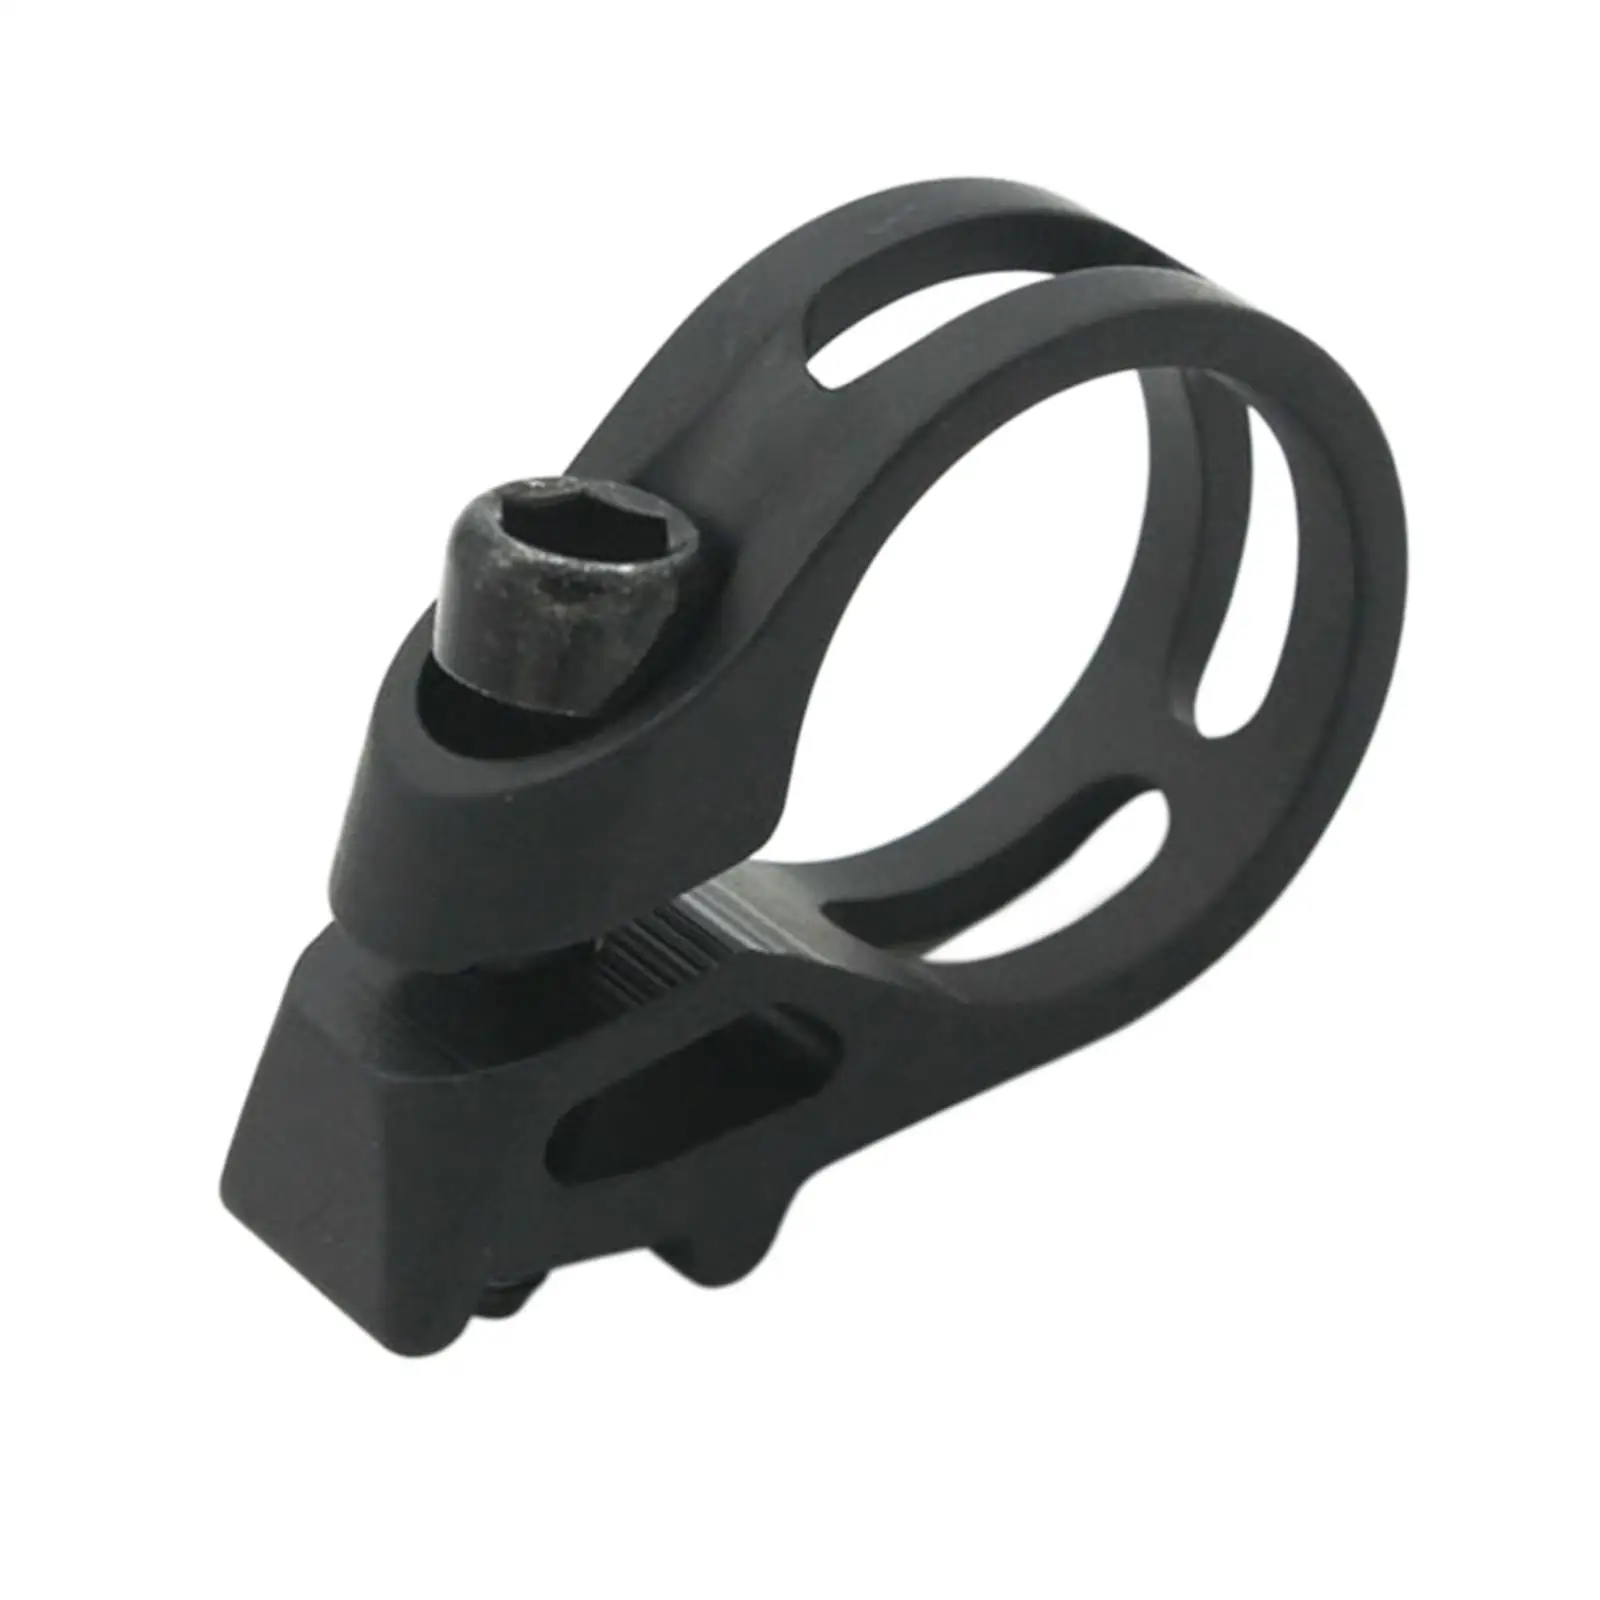 22.2mm Aluminum Alloy Bike Shifter Clamp, Bicycle  Assembly Brake Shifter Tube Derailleur Clamp 7 X9 X0 XX XO1 XX1